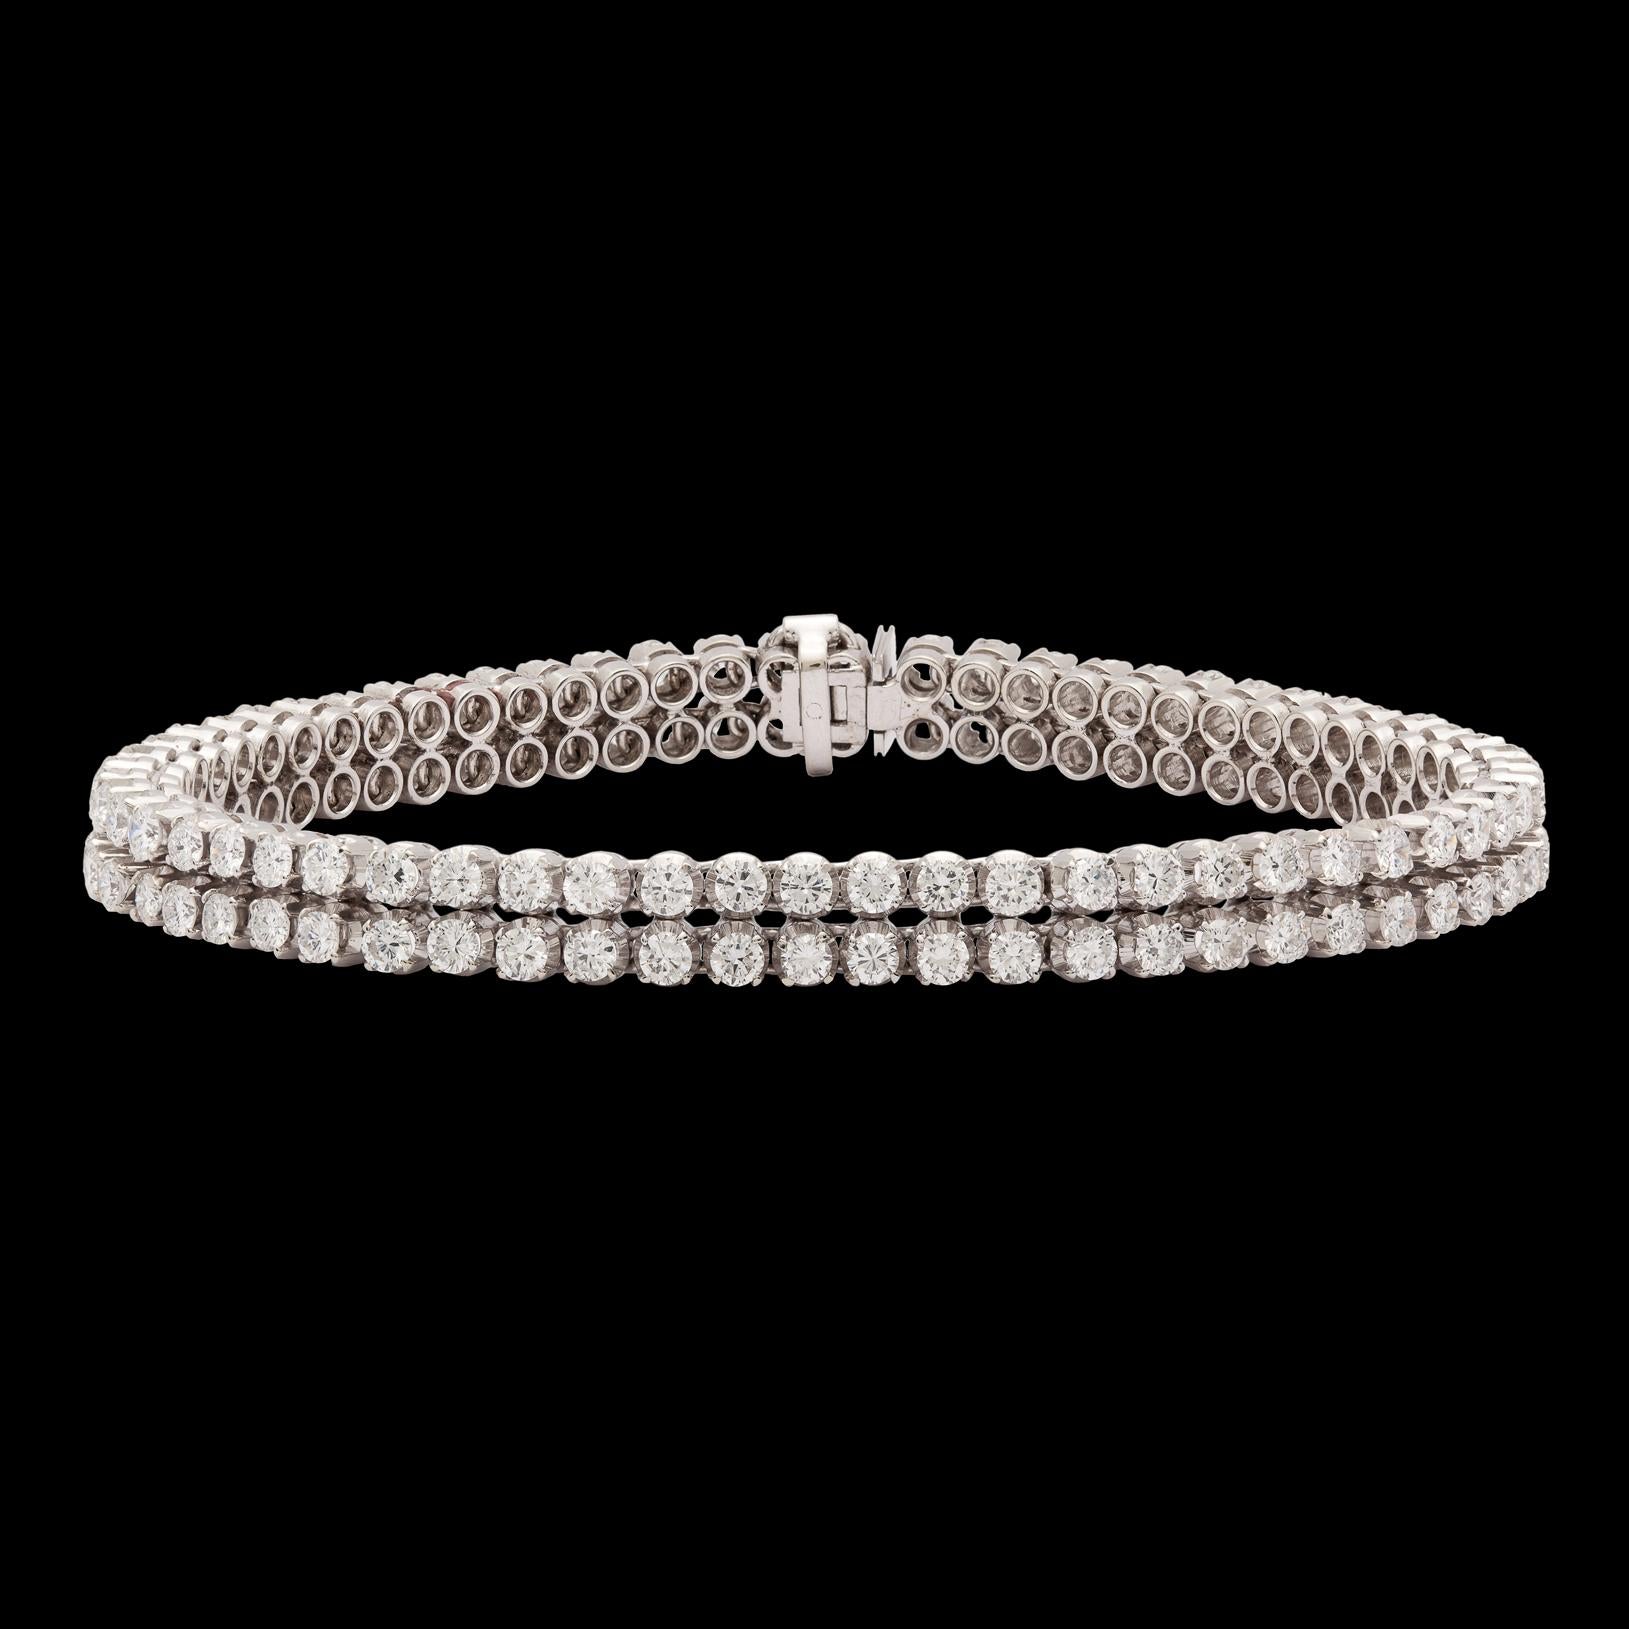 Double the sparkle of a traditional diamond line bracelet. This 18kt White Gold Double Row Diamond Tennis Bracelet totals 6.70 carats, linking two diamond tennis bracelets together for one impressive look. The bracelet measures 7 inches long and